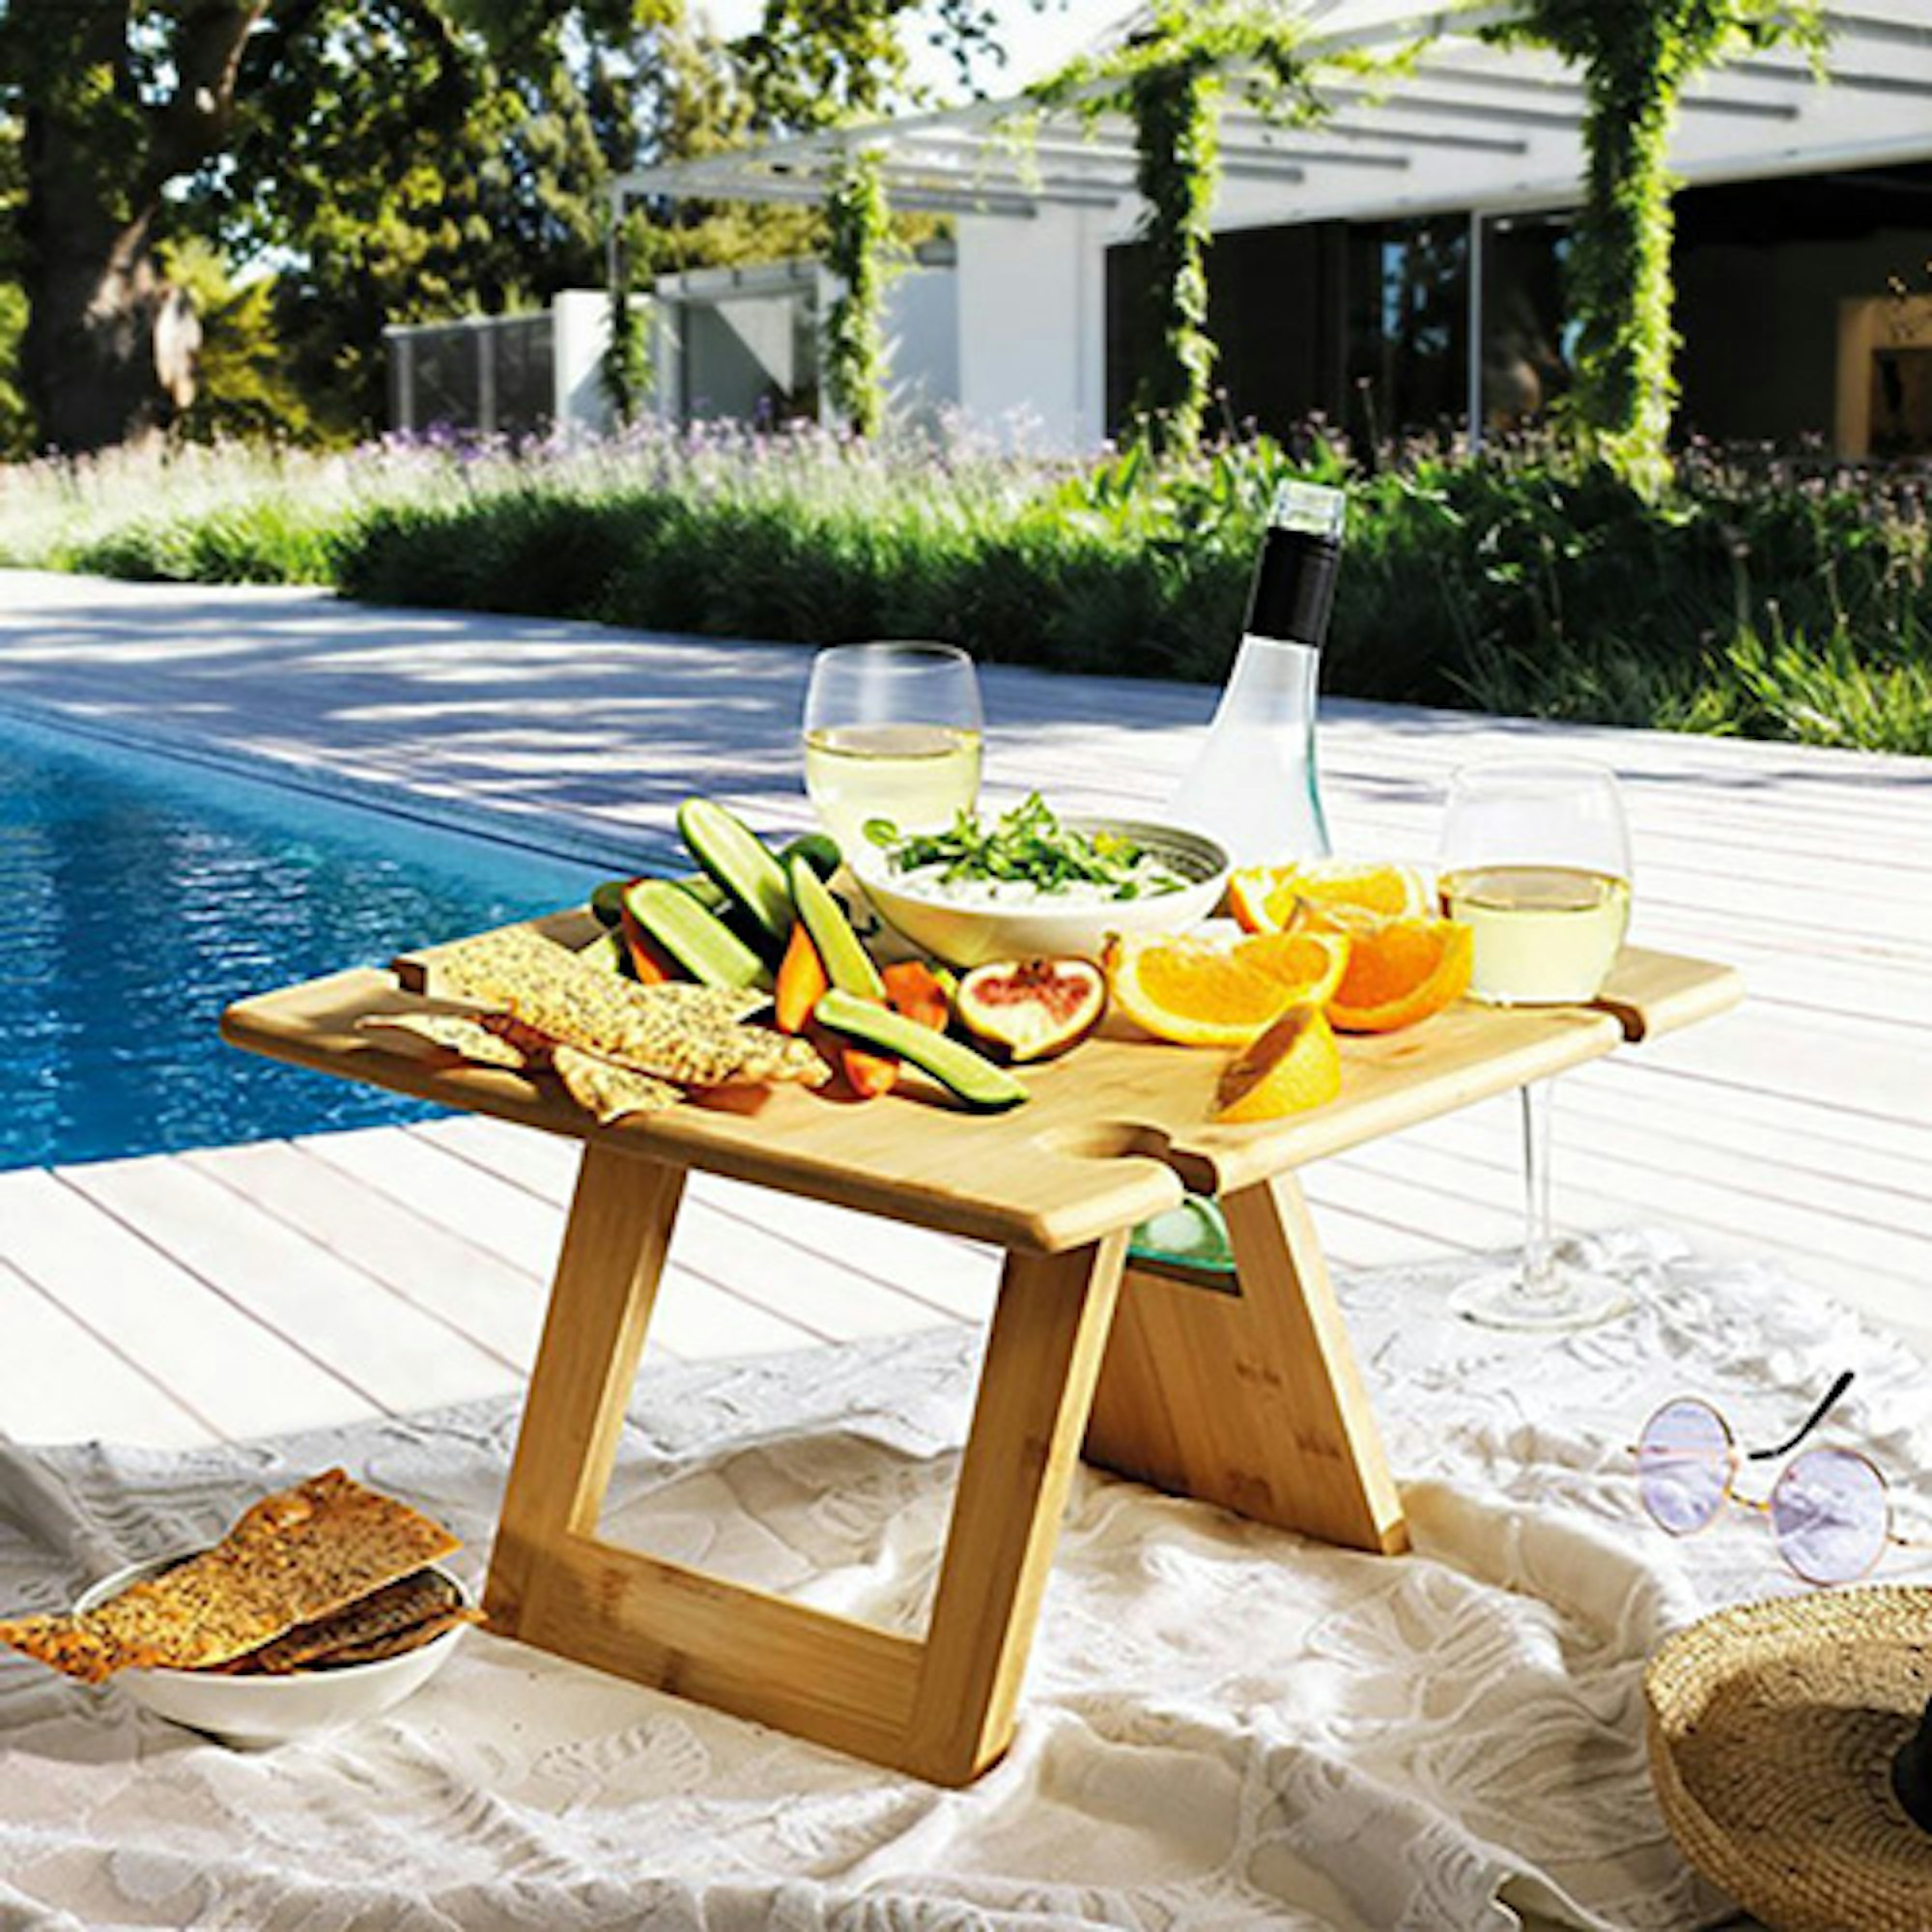 Picnic tray by poolside with wine and food